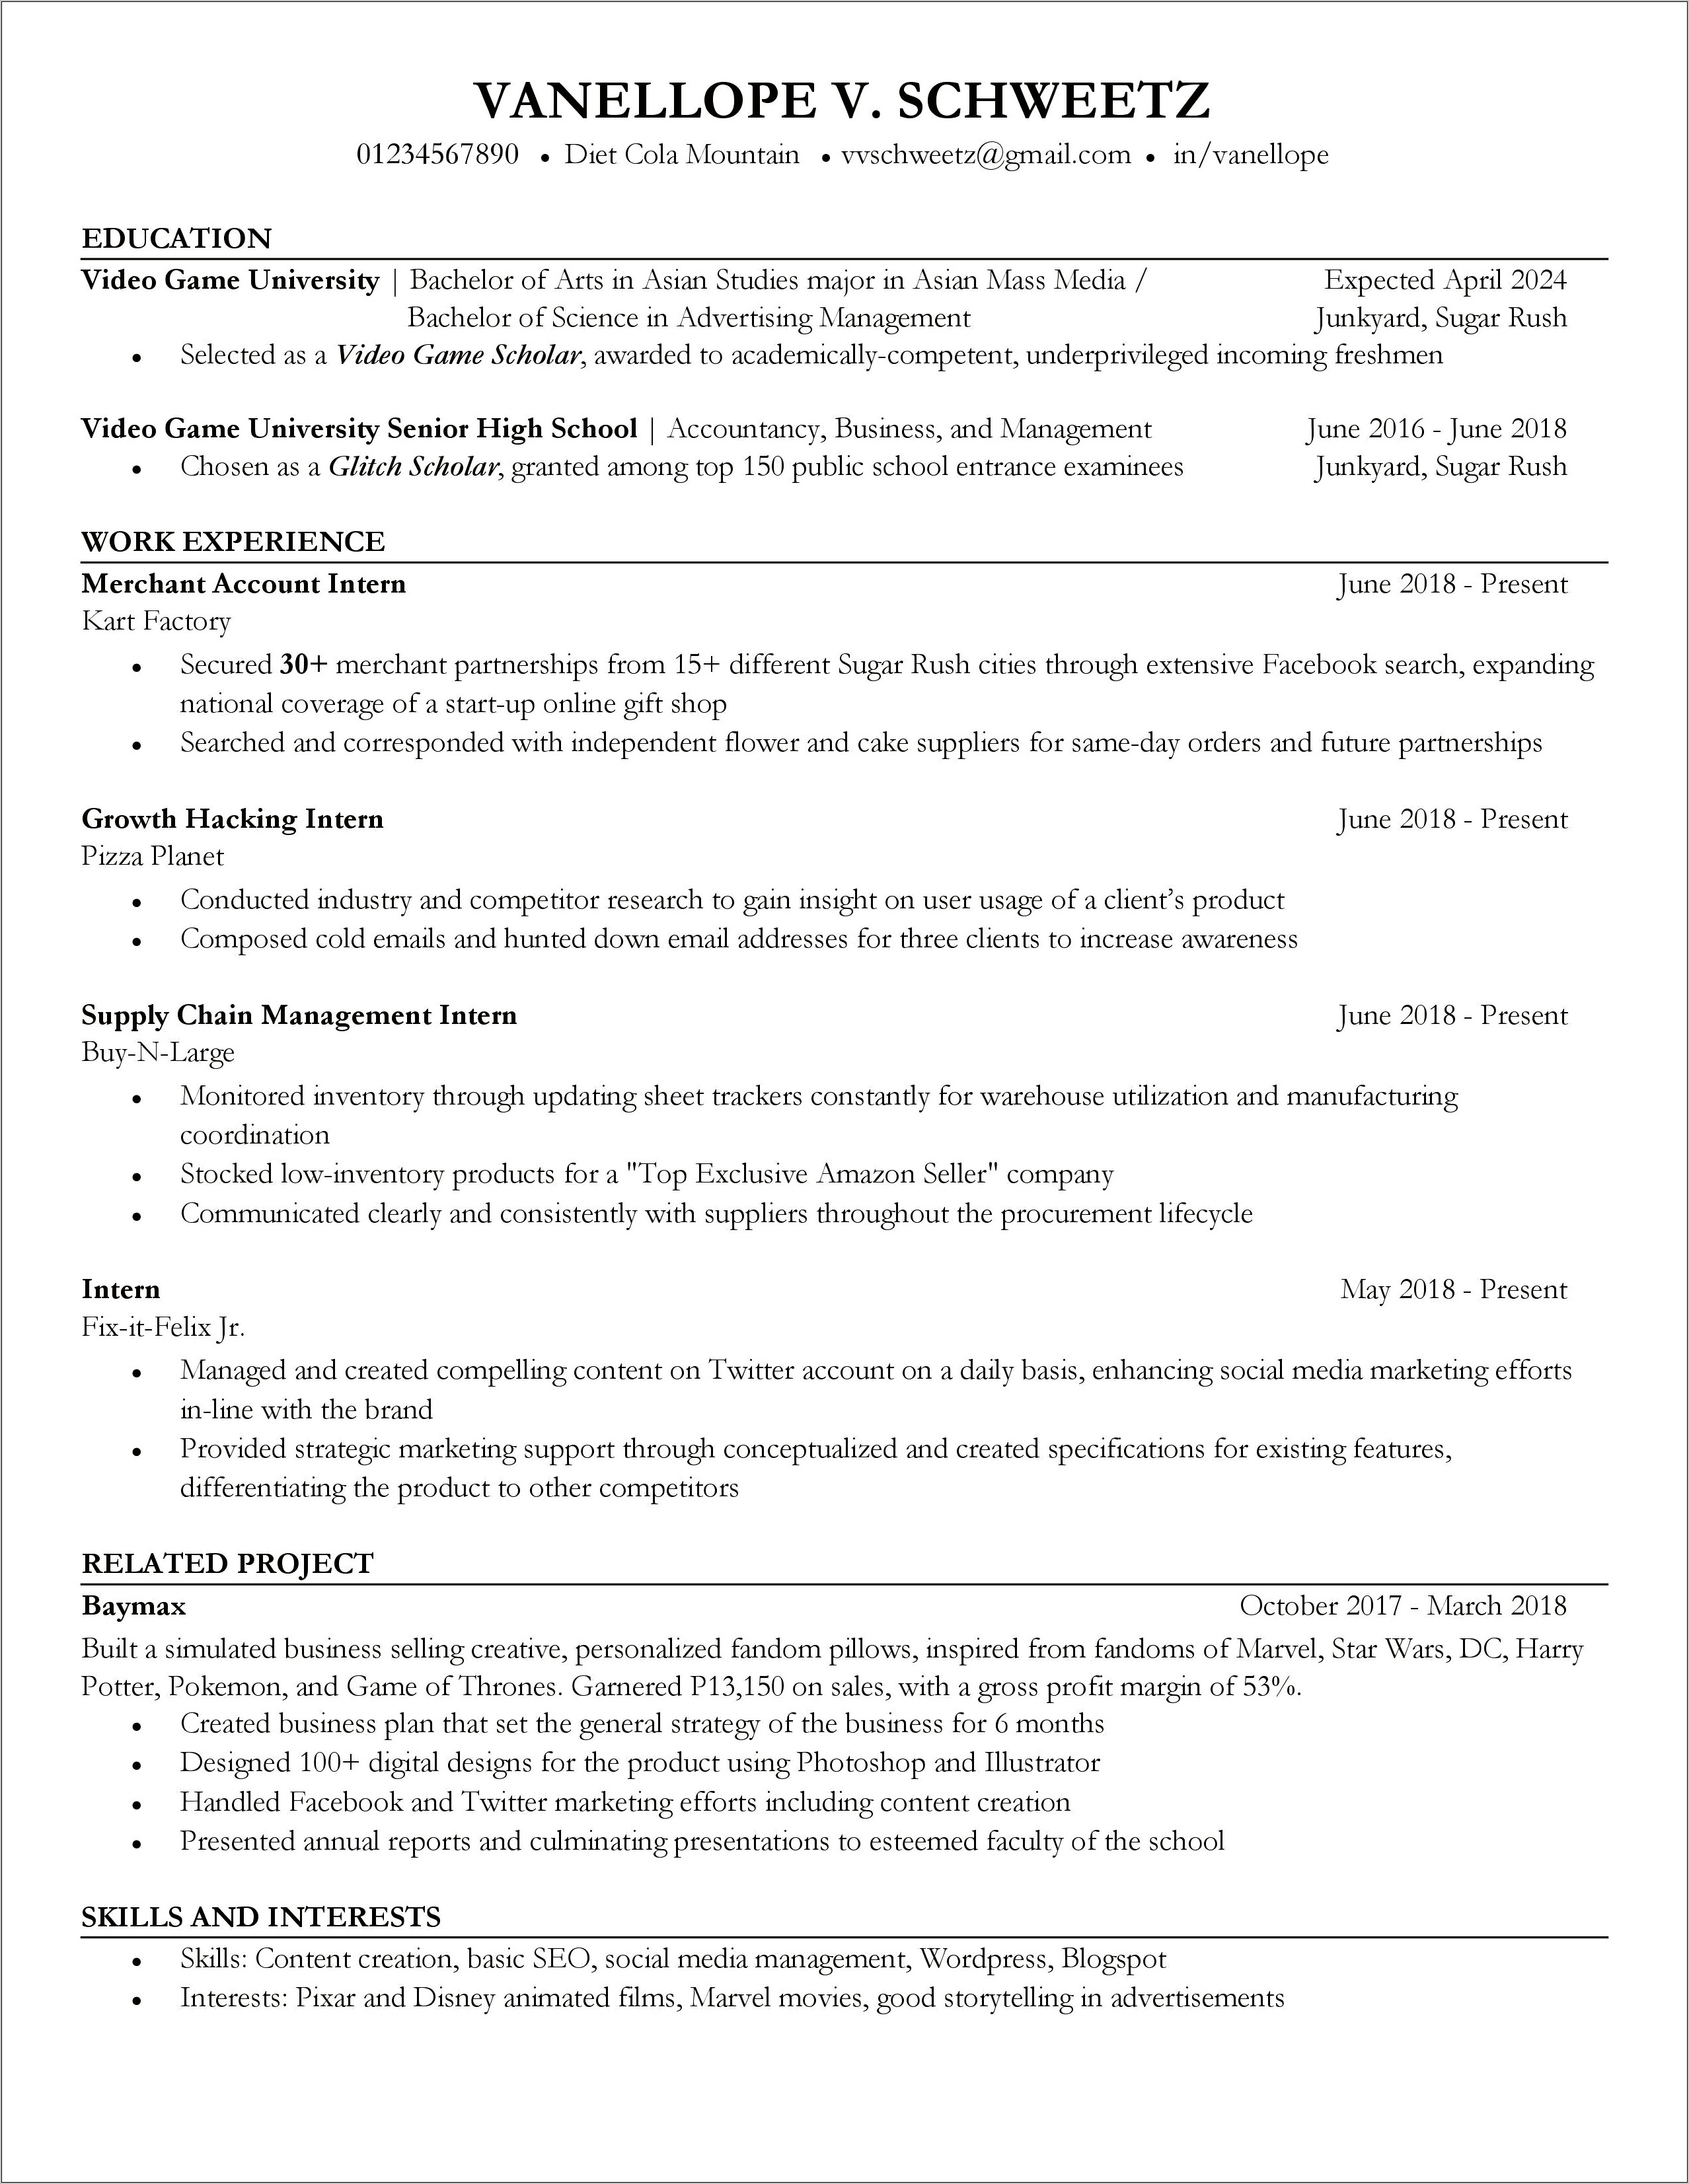 Put Project Date As Present In Resume Reddit